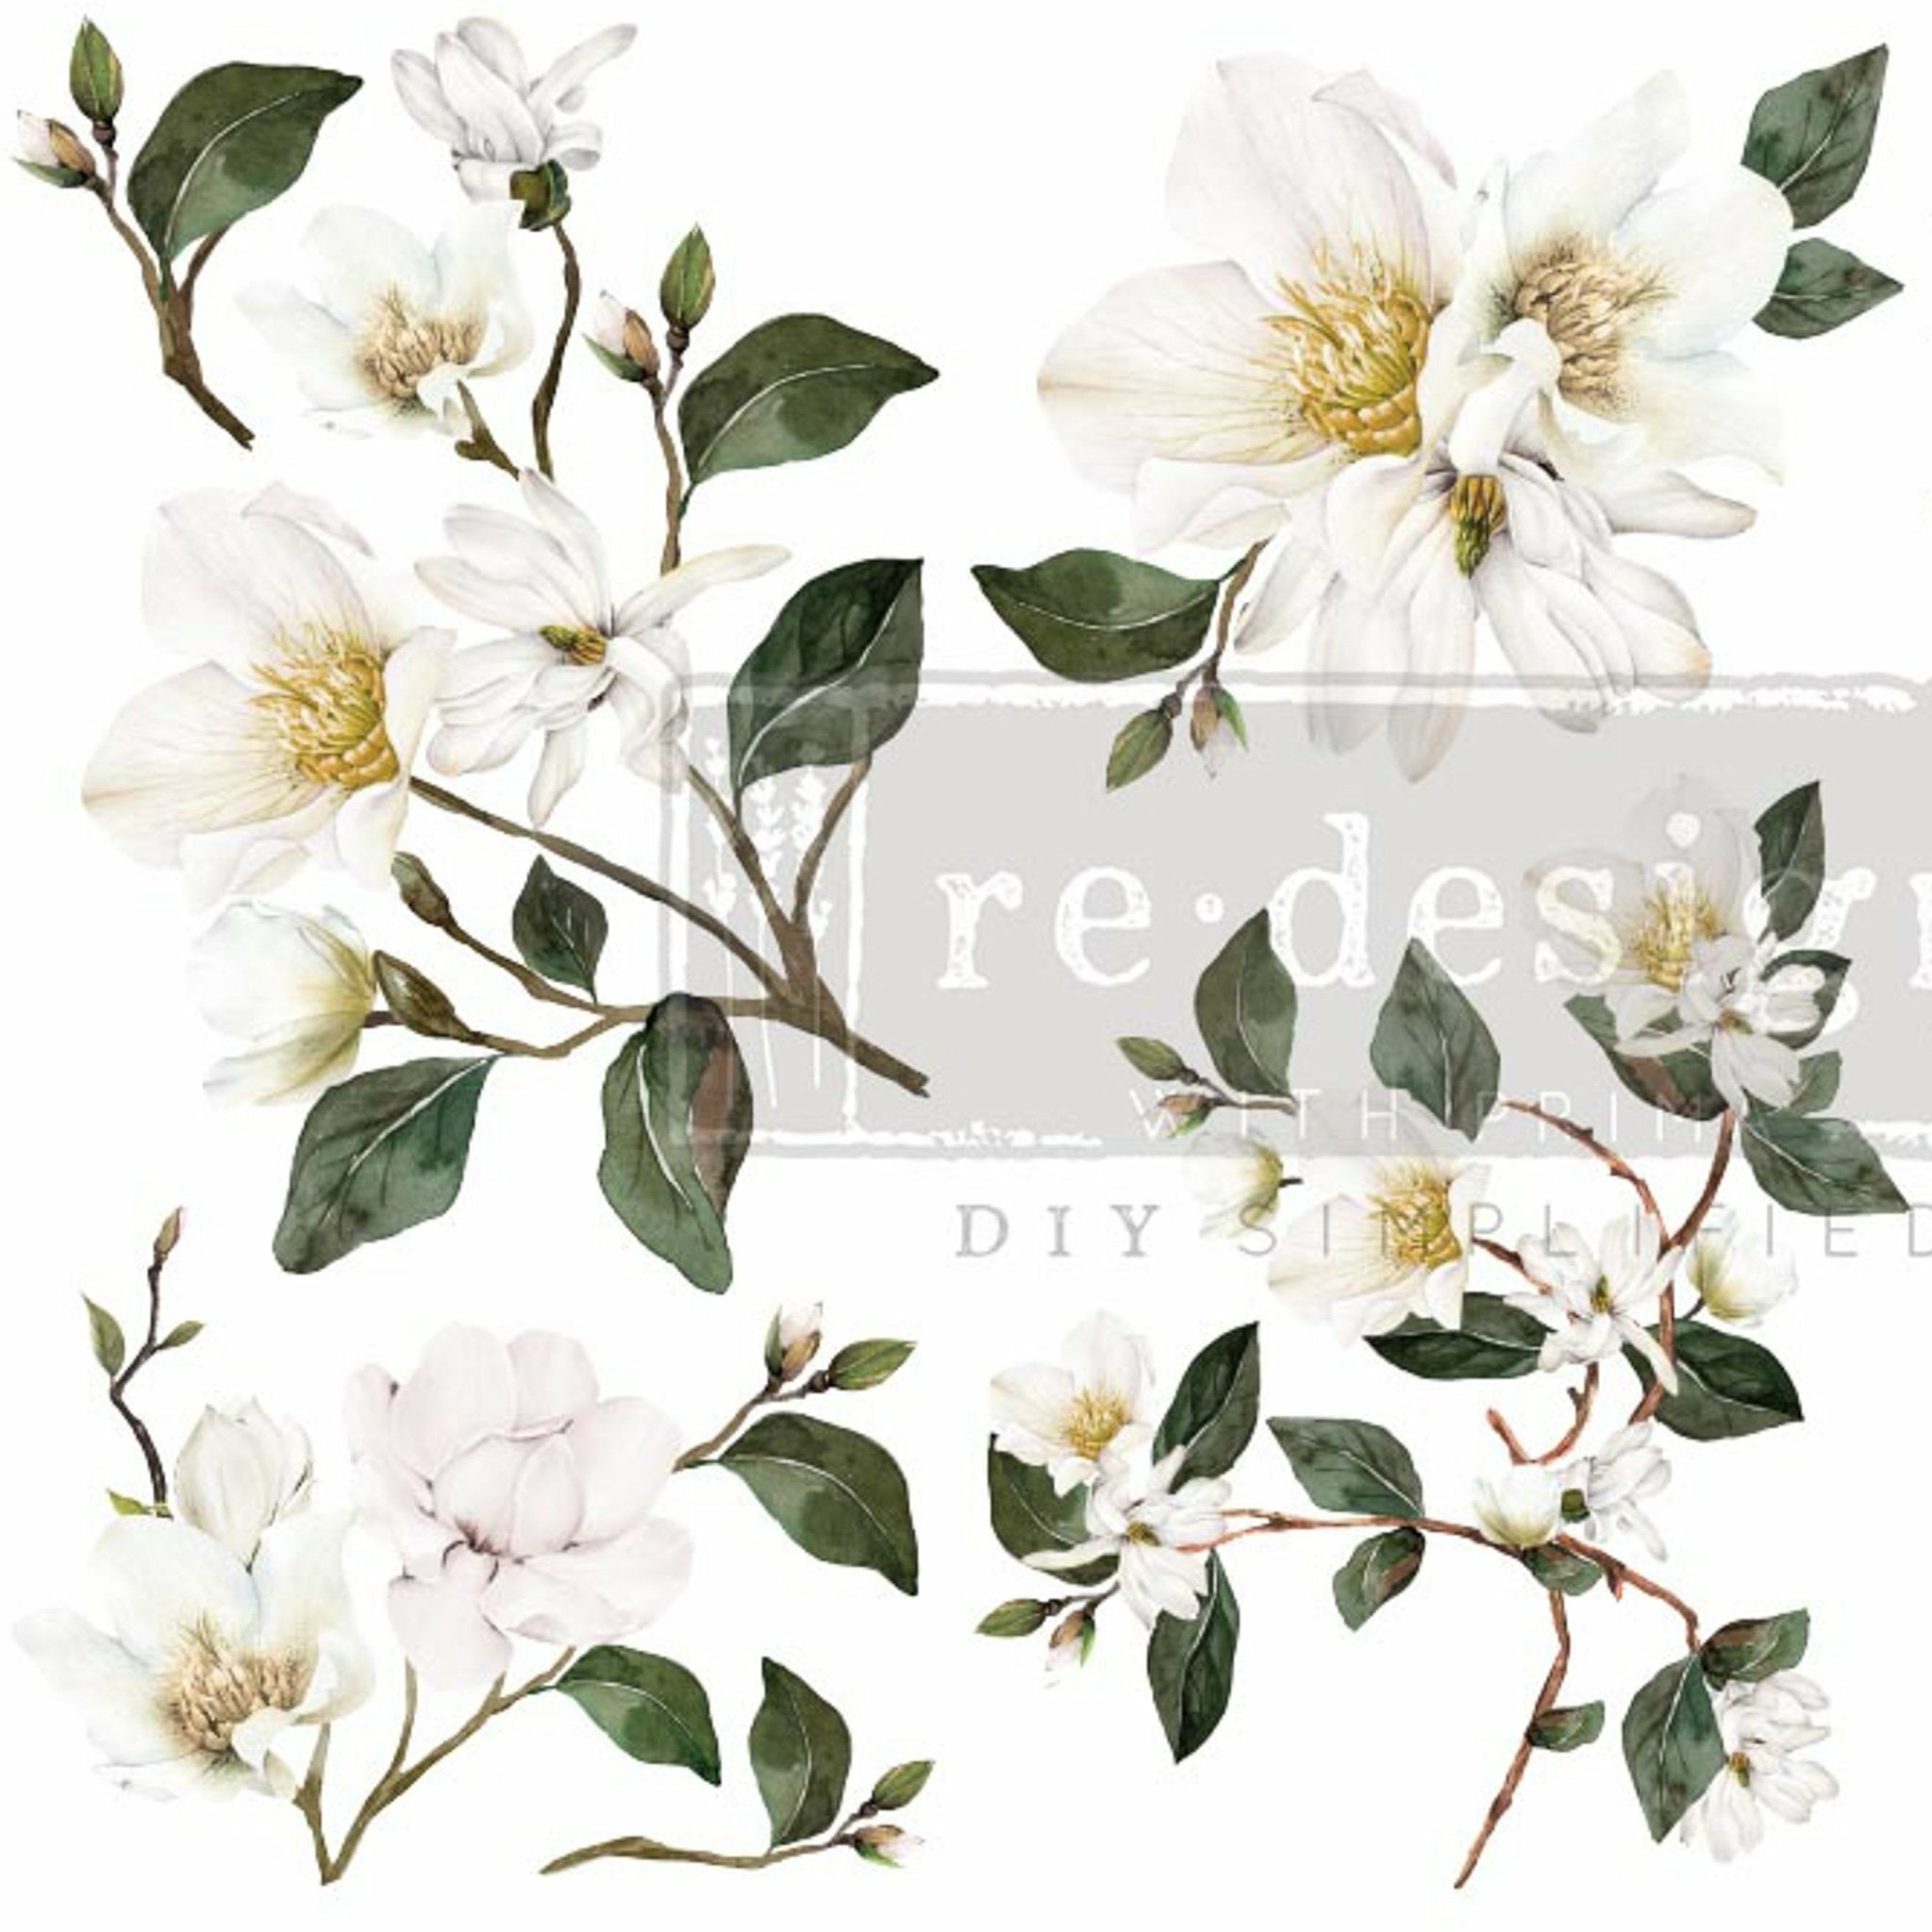 Small rub-on transfer design of white magnolia flowers on branches with green foliage.